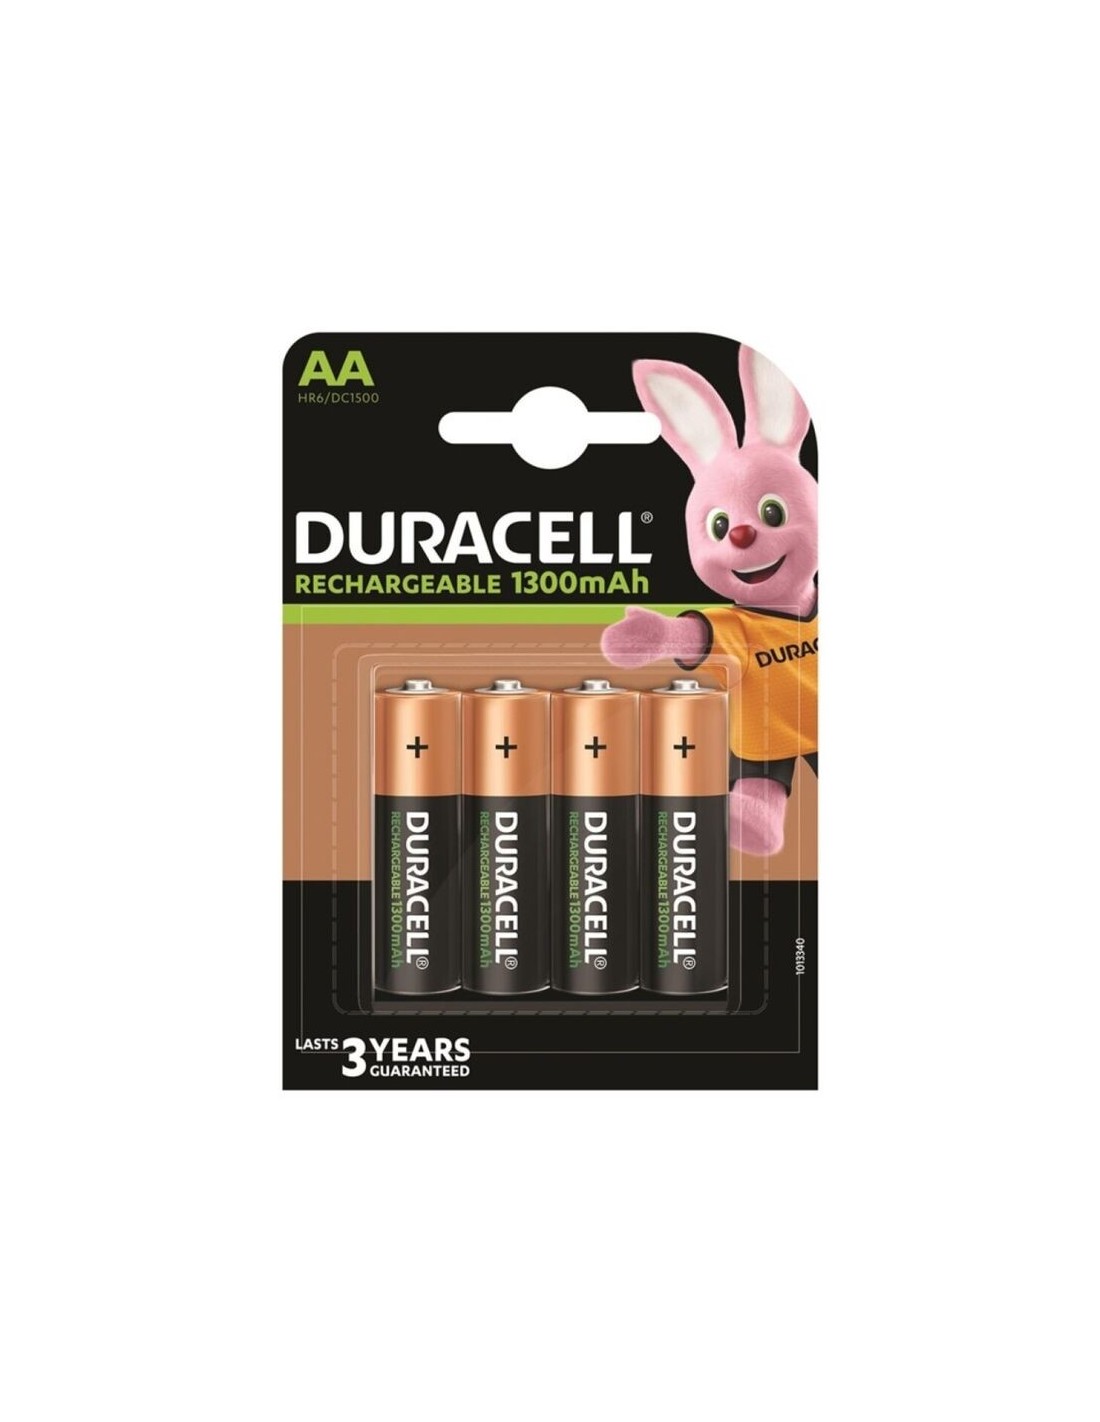 4 x Duracell Rechargeable Batteries AA 1300MaH NiMH HR6/DC1500 